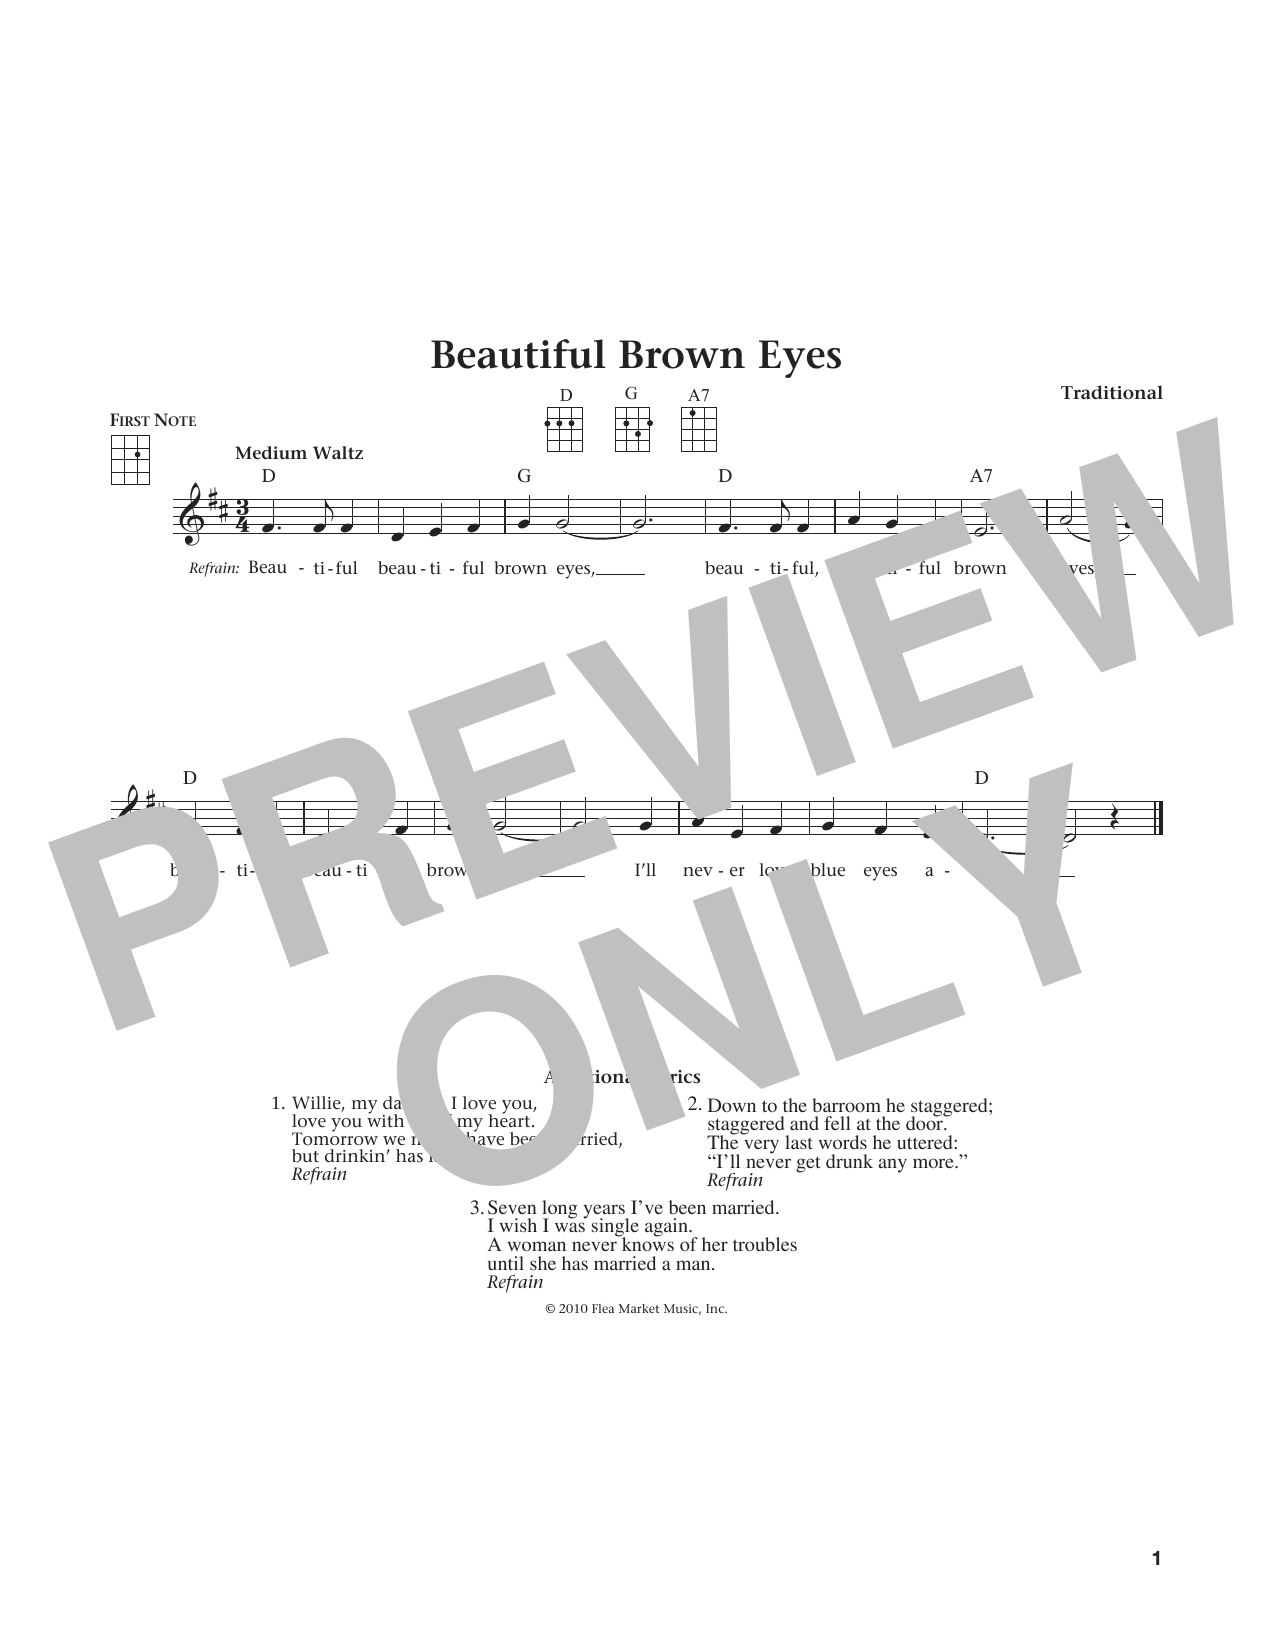 Download Traditional Beautiful Brown Eyes (from The Daily Uk Sheet Music